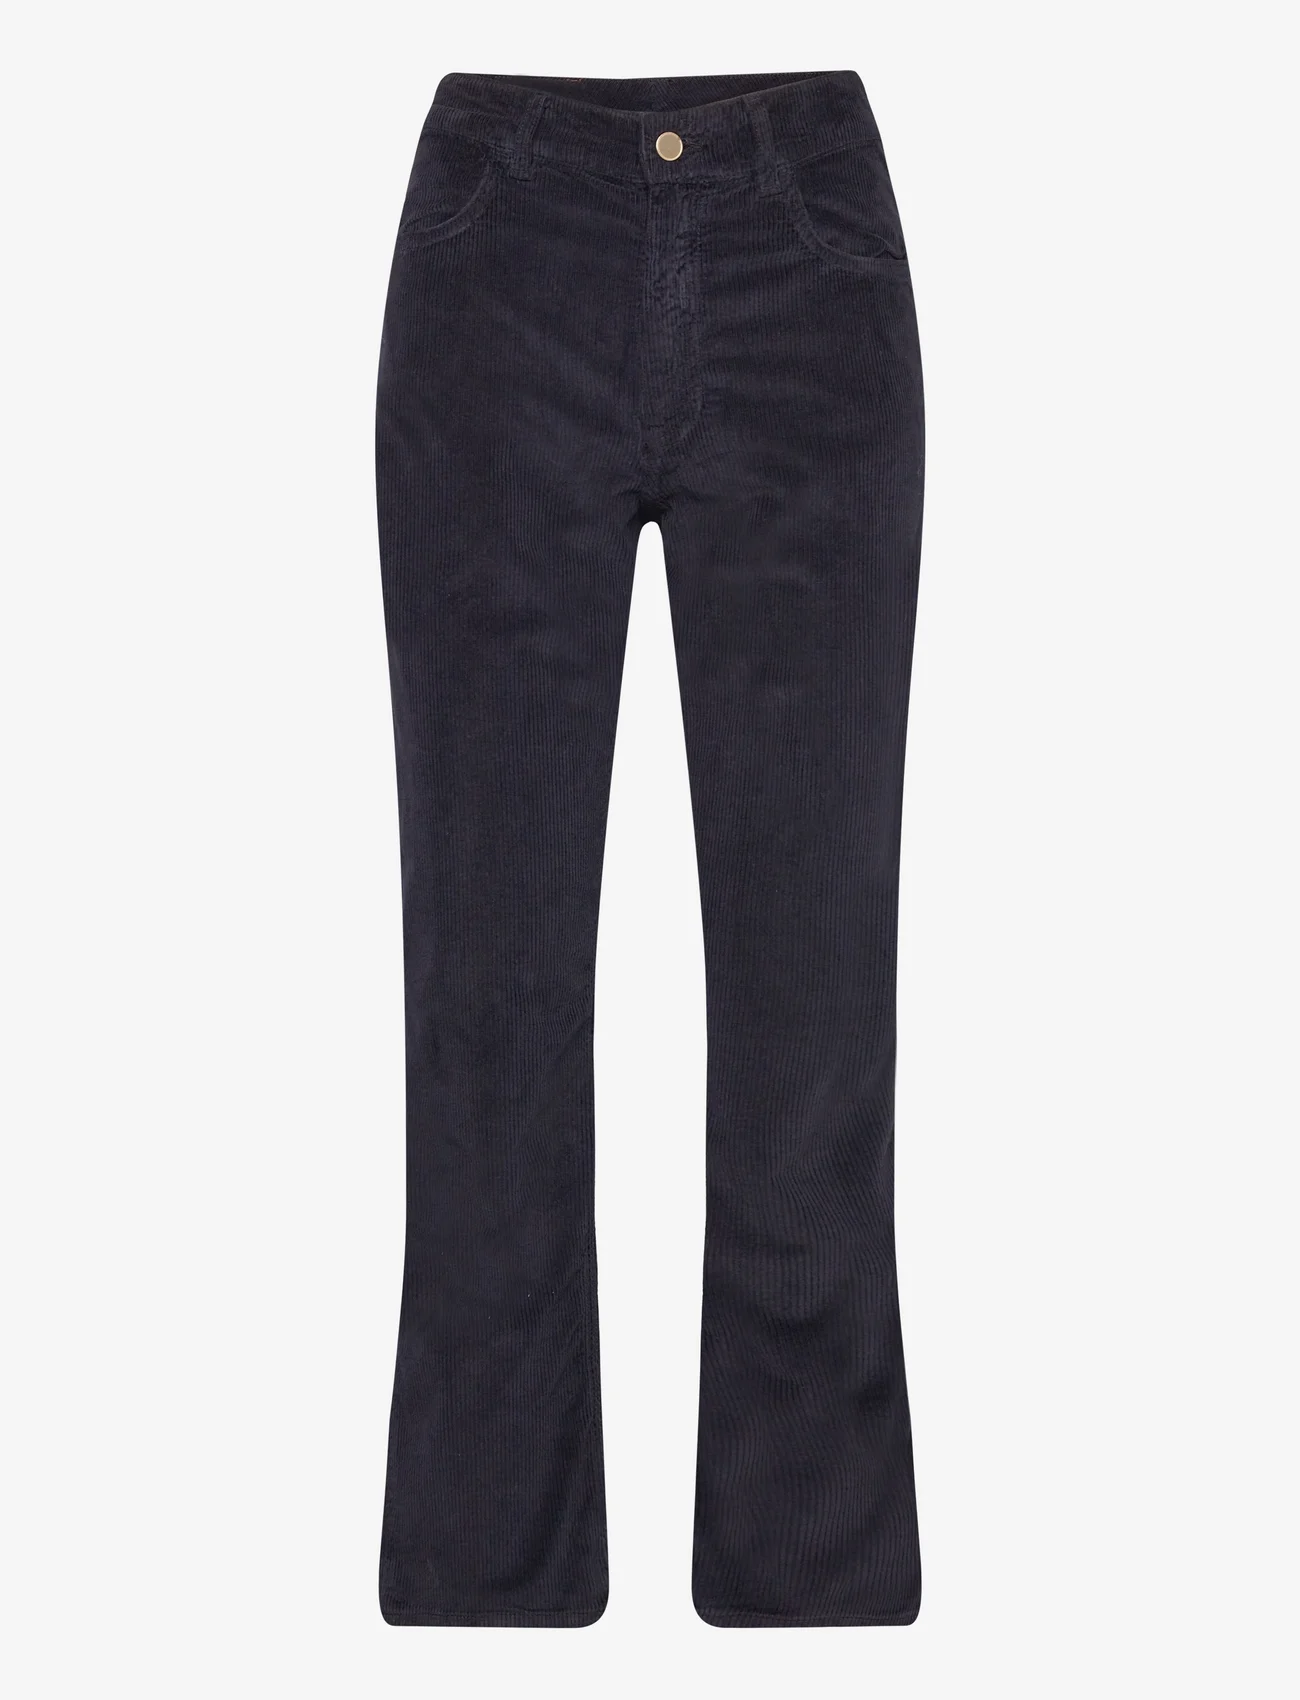 GANT - CORD CROPPED FLARE JEANS - schlaghosen - evening blue - 0